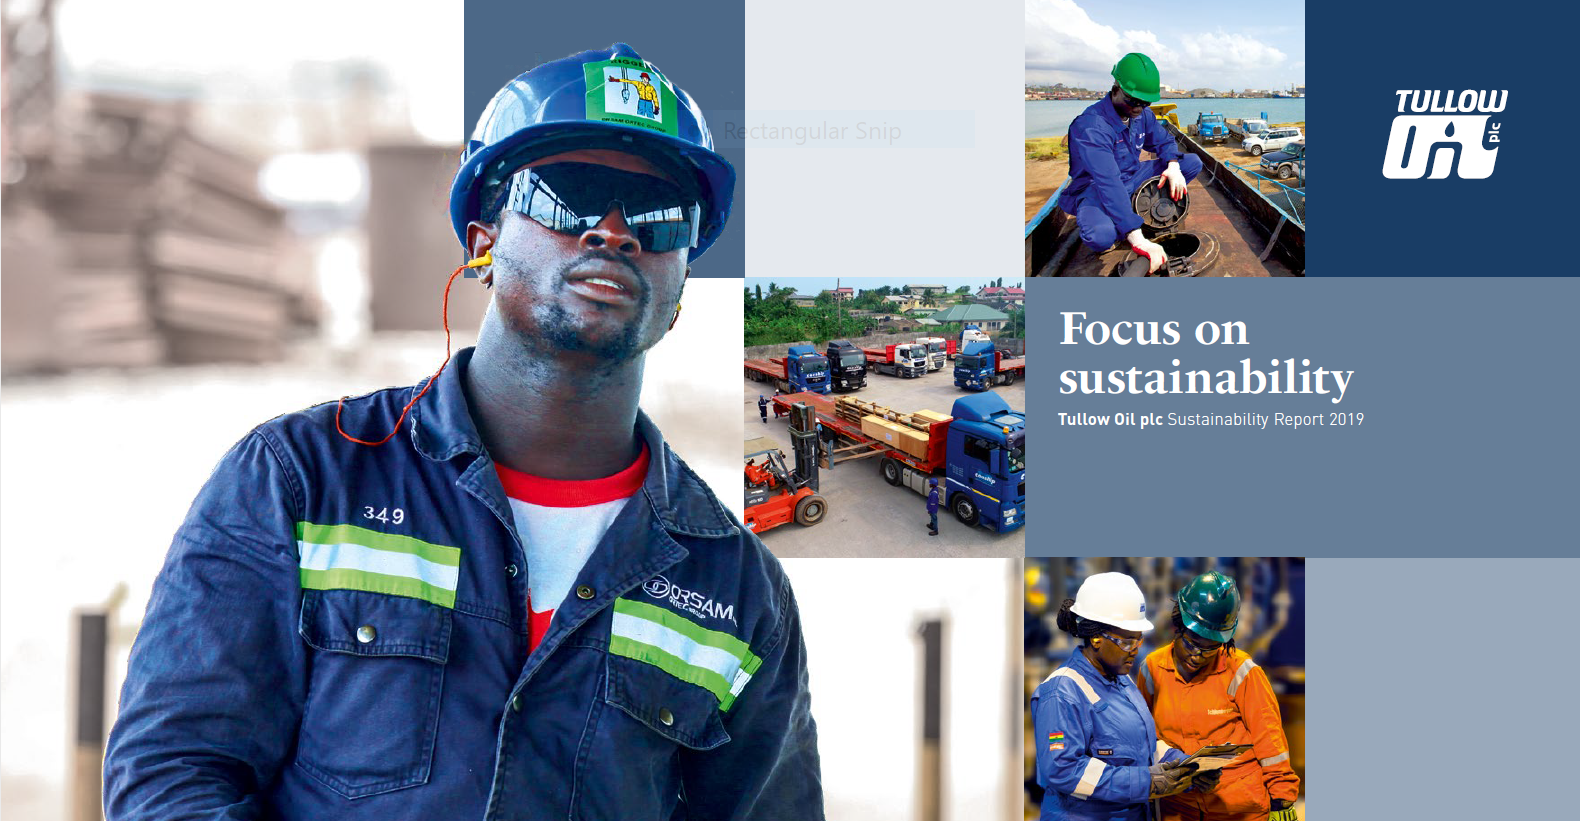 Bentworth Energy Featured in Tullow Oil's Focus on Sustainability ...